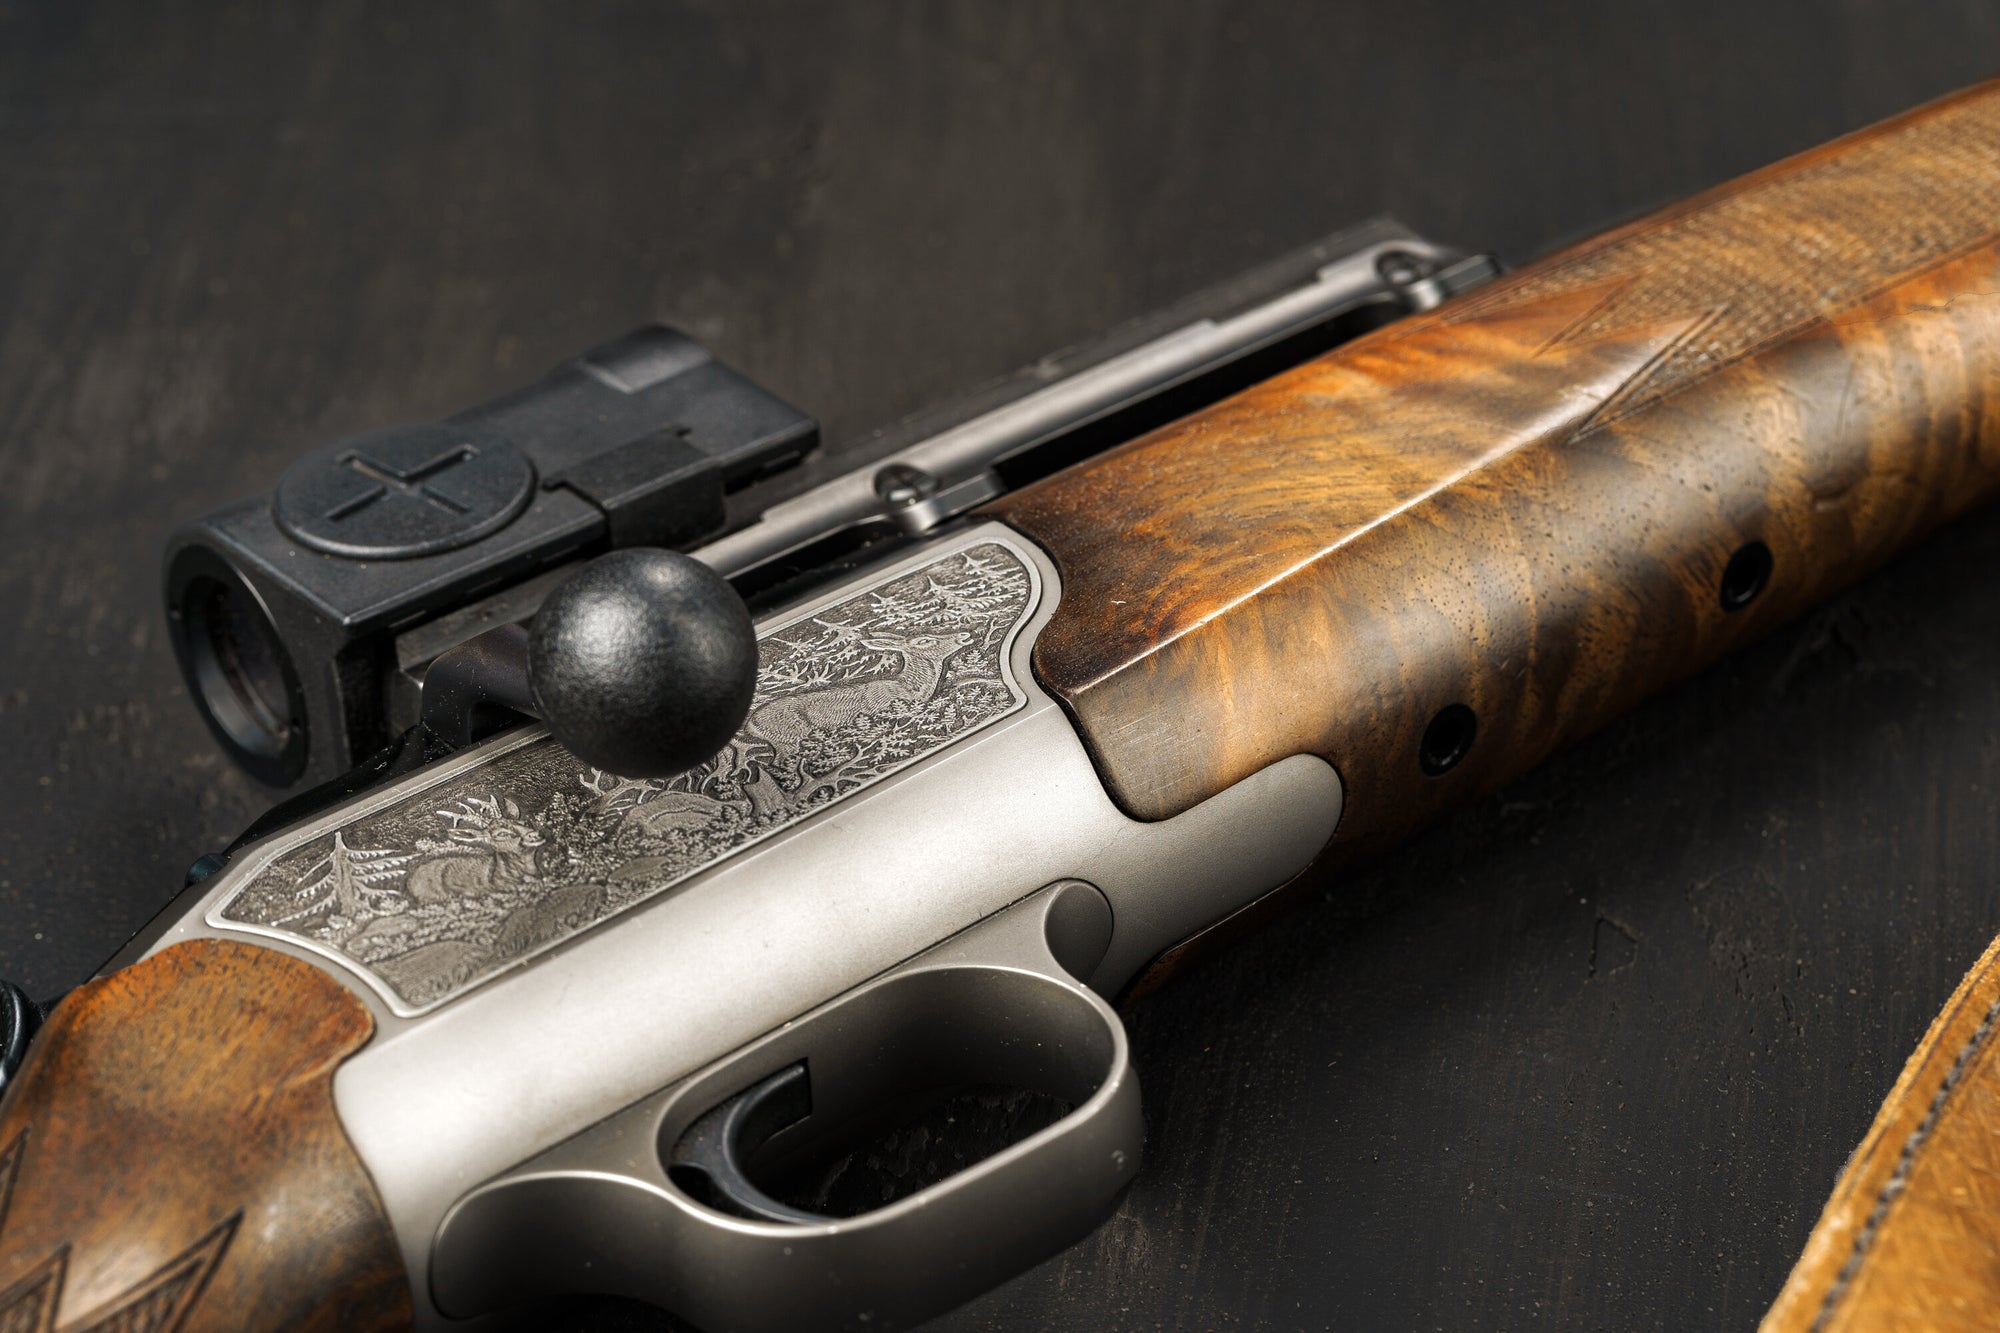 Get Locked and Loaded: Top 6 Gun Art Gifts for Enthusiasts